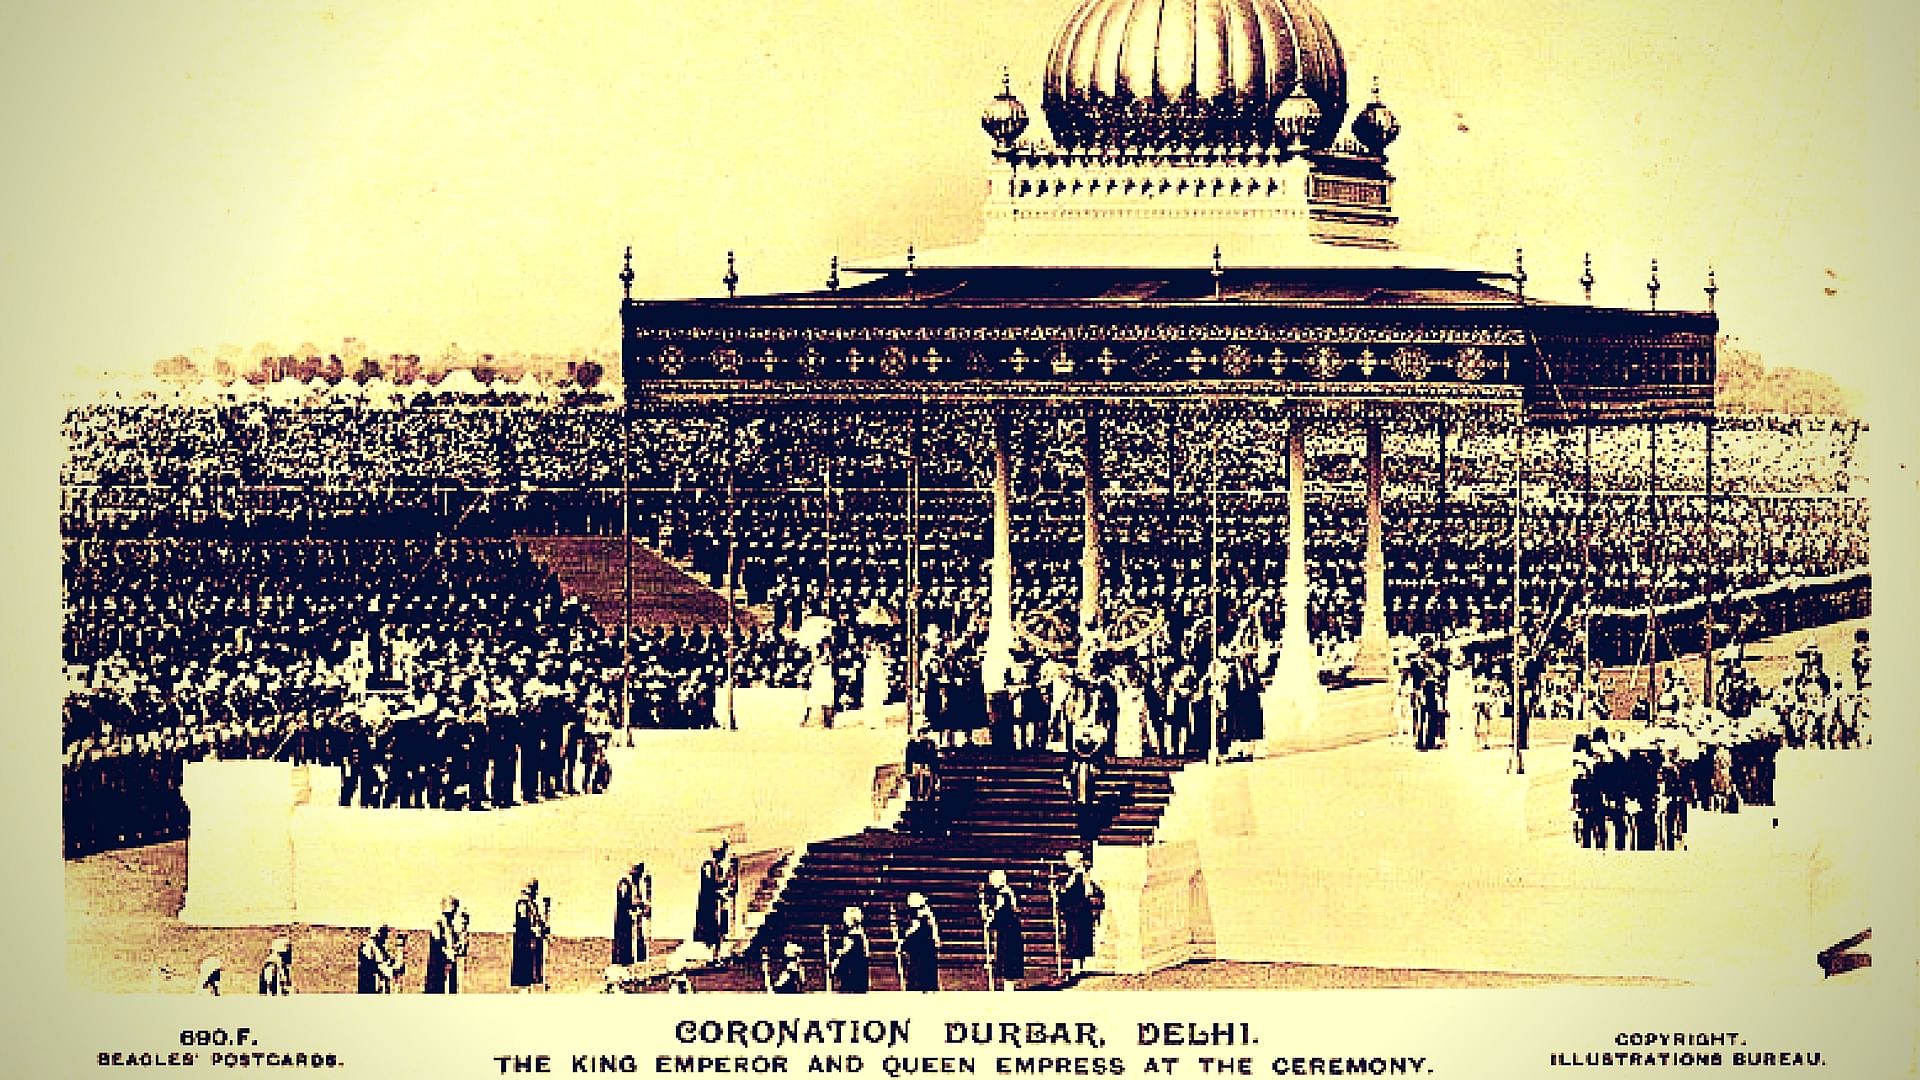 The Delhi Durbar of 1911 with King George V and Queen Mary seated upon the dais. (Photo: Wikimedia Commons)